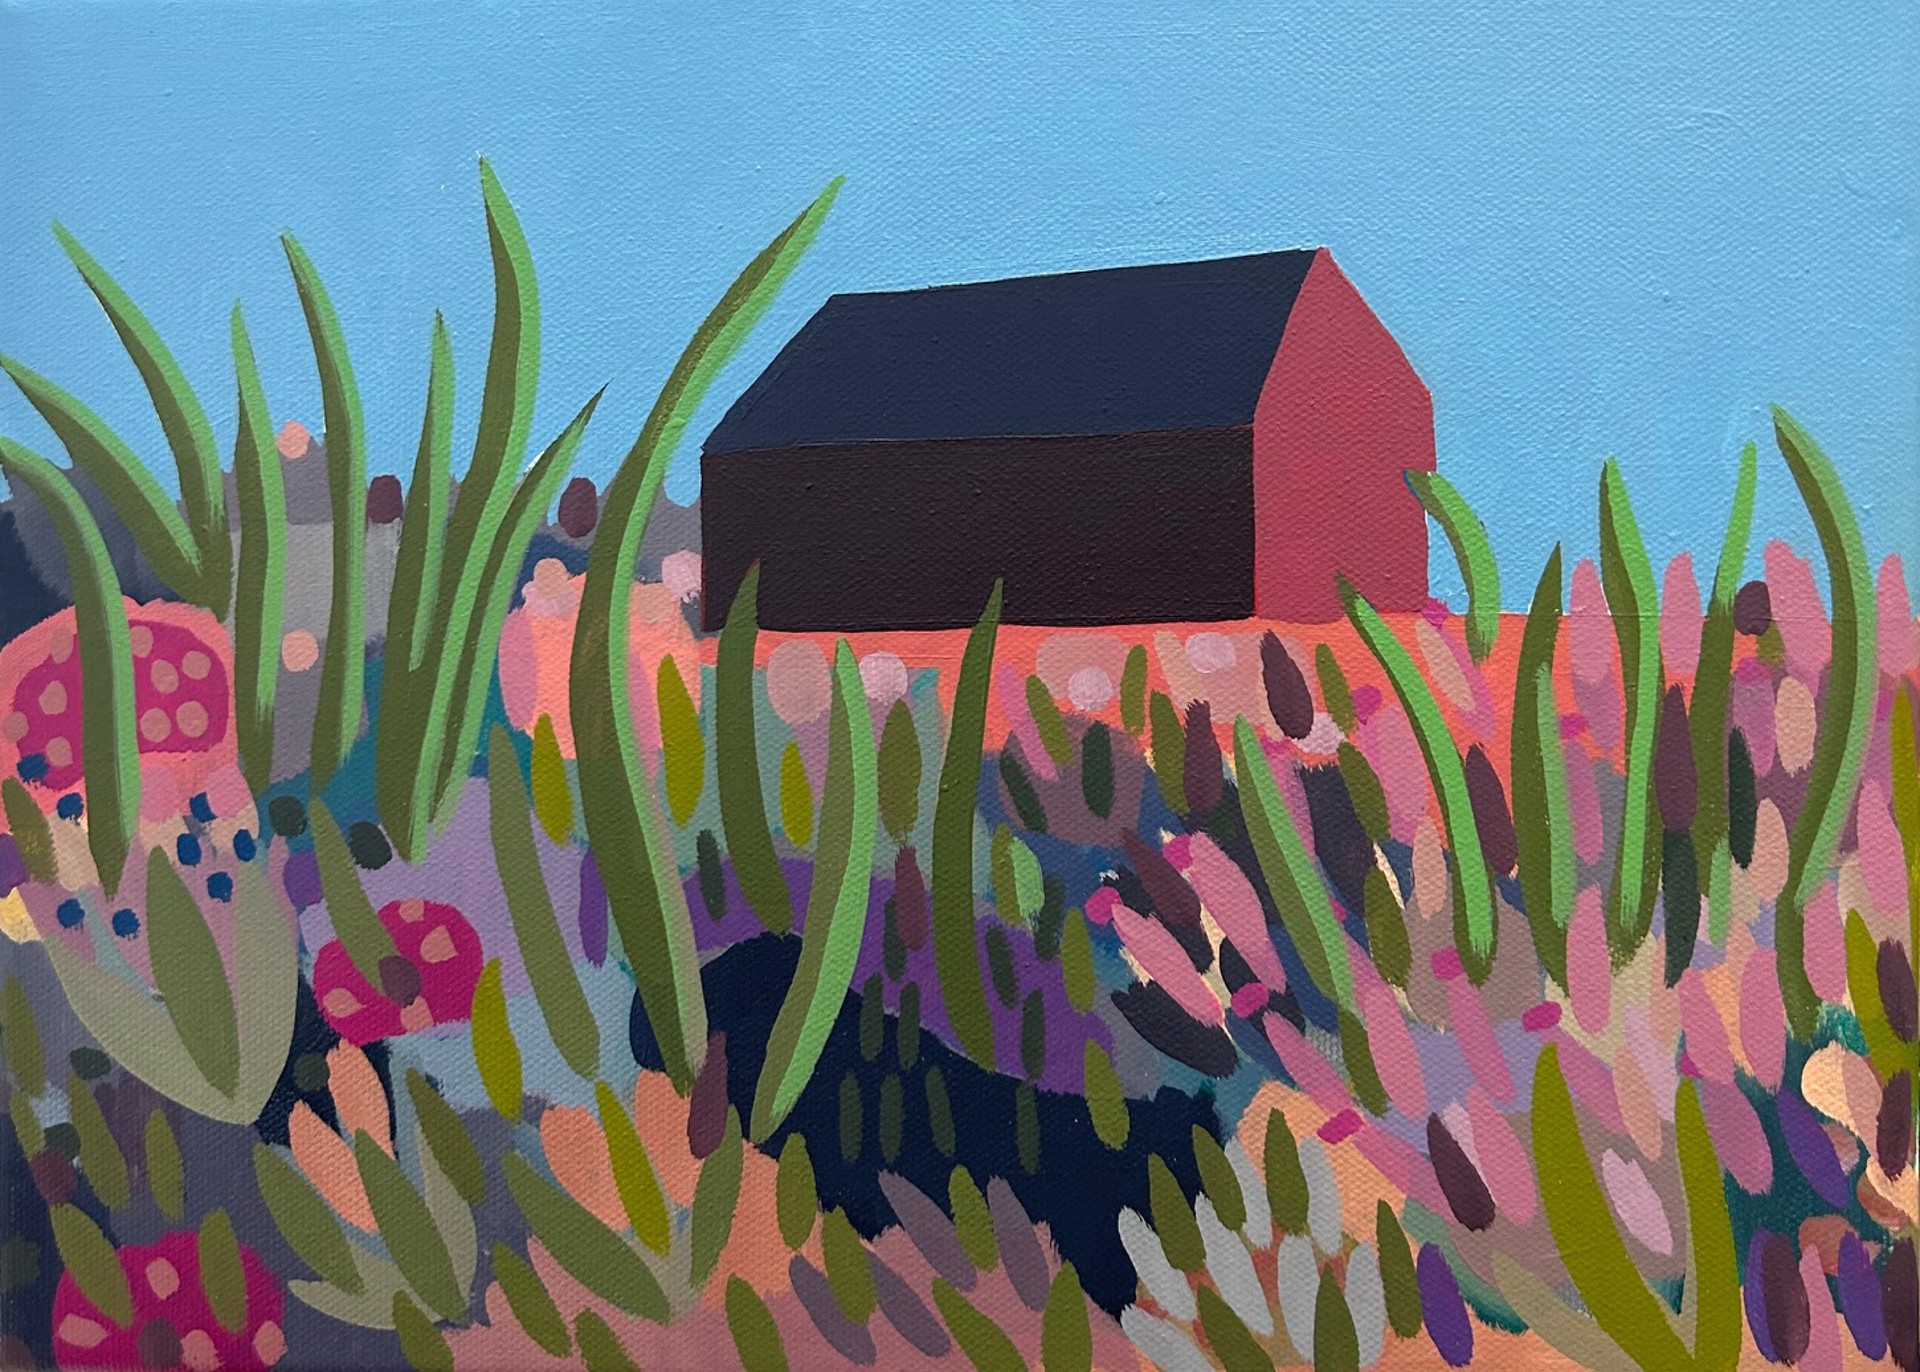 Tall grasses surround a Red Barn by Sage Tucker-Ketcham